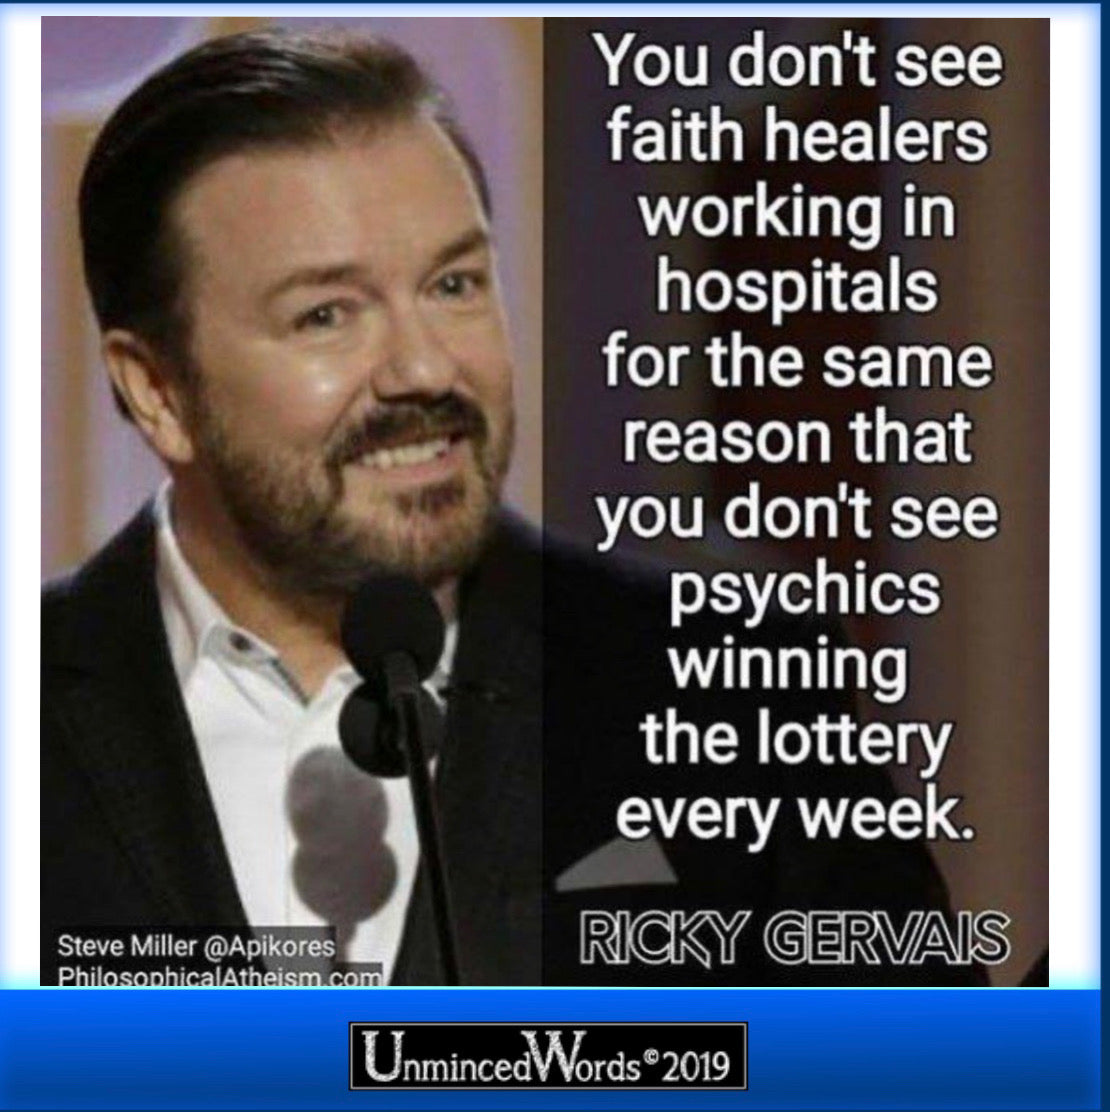 Ricky Gervais got this one right